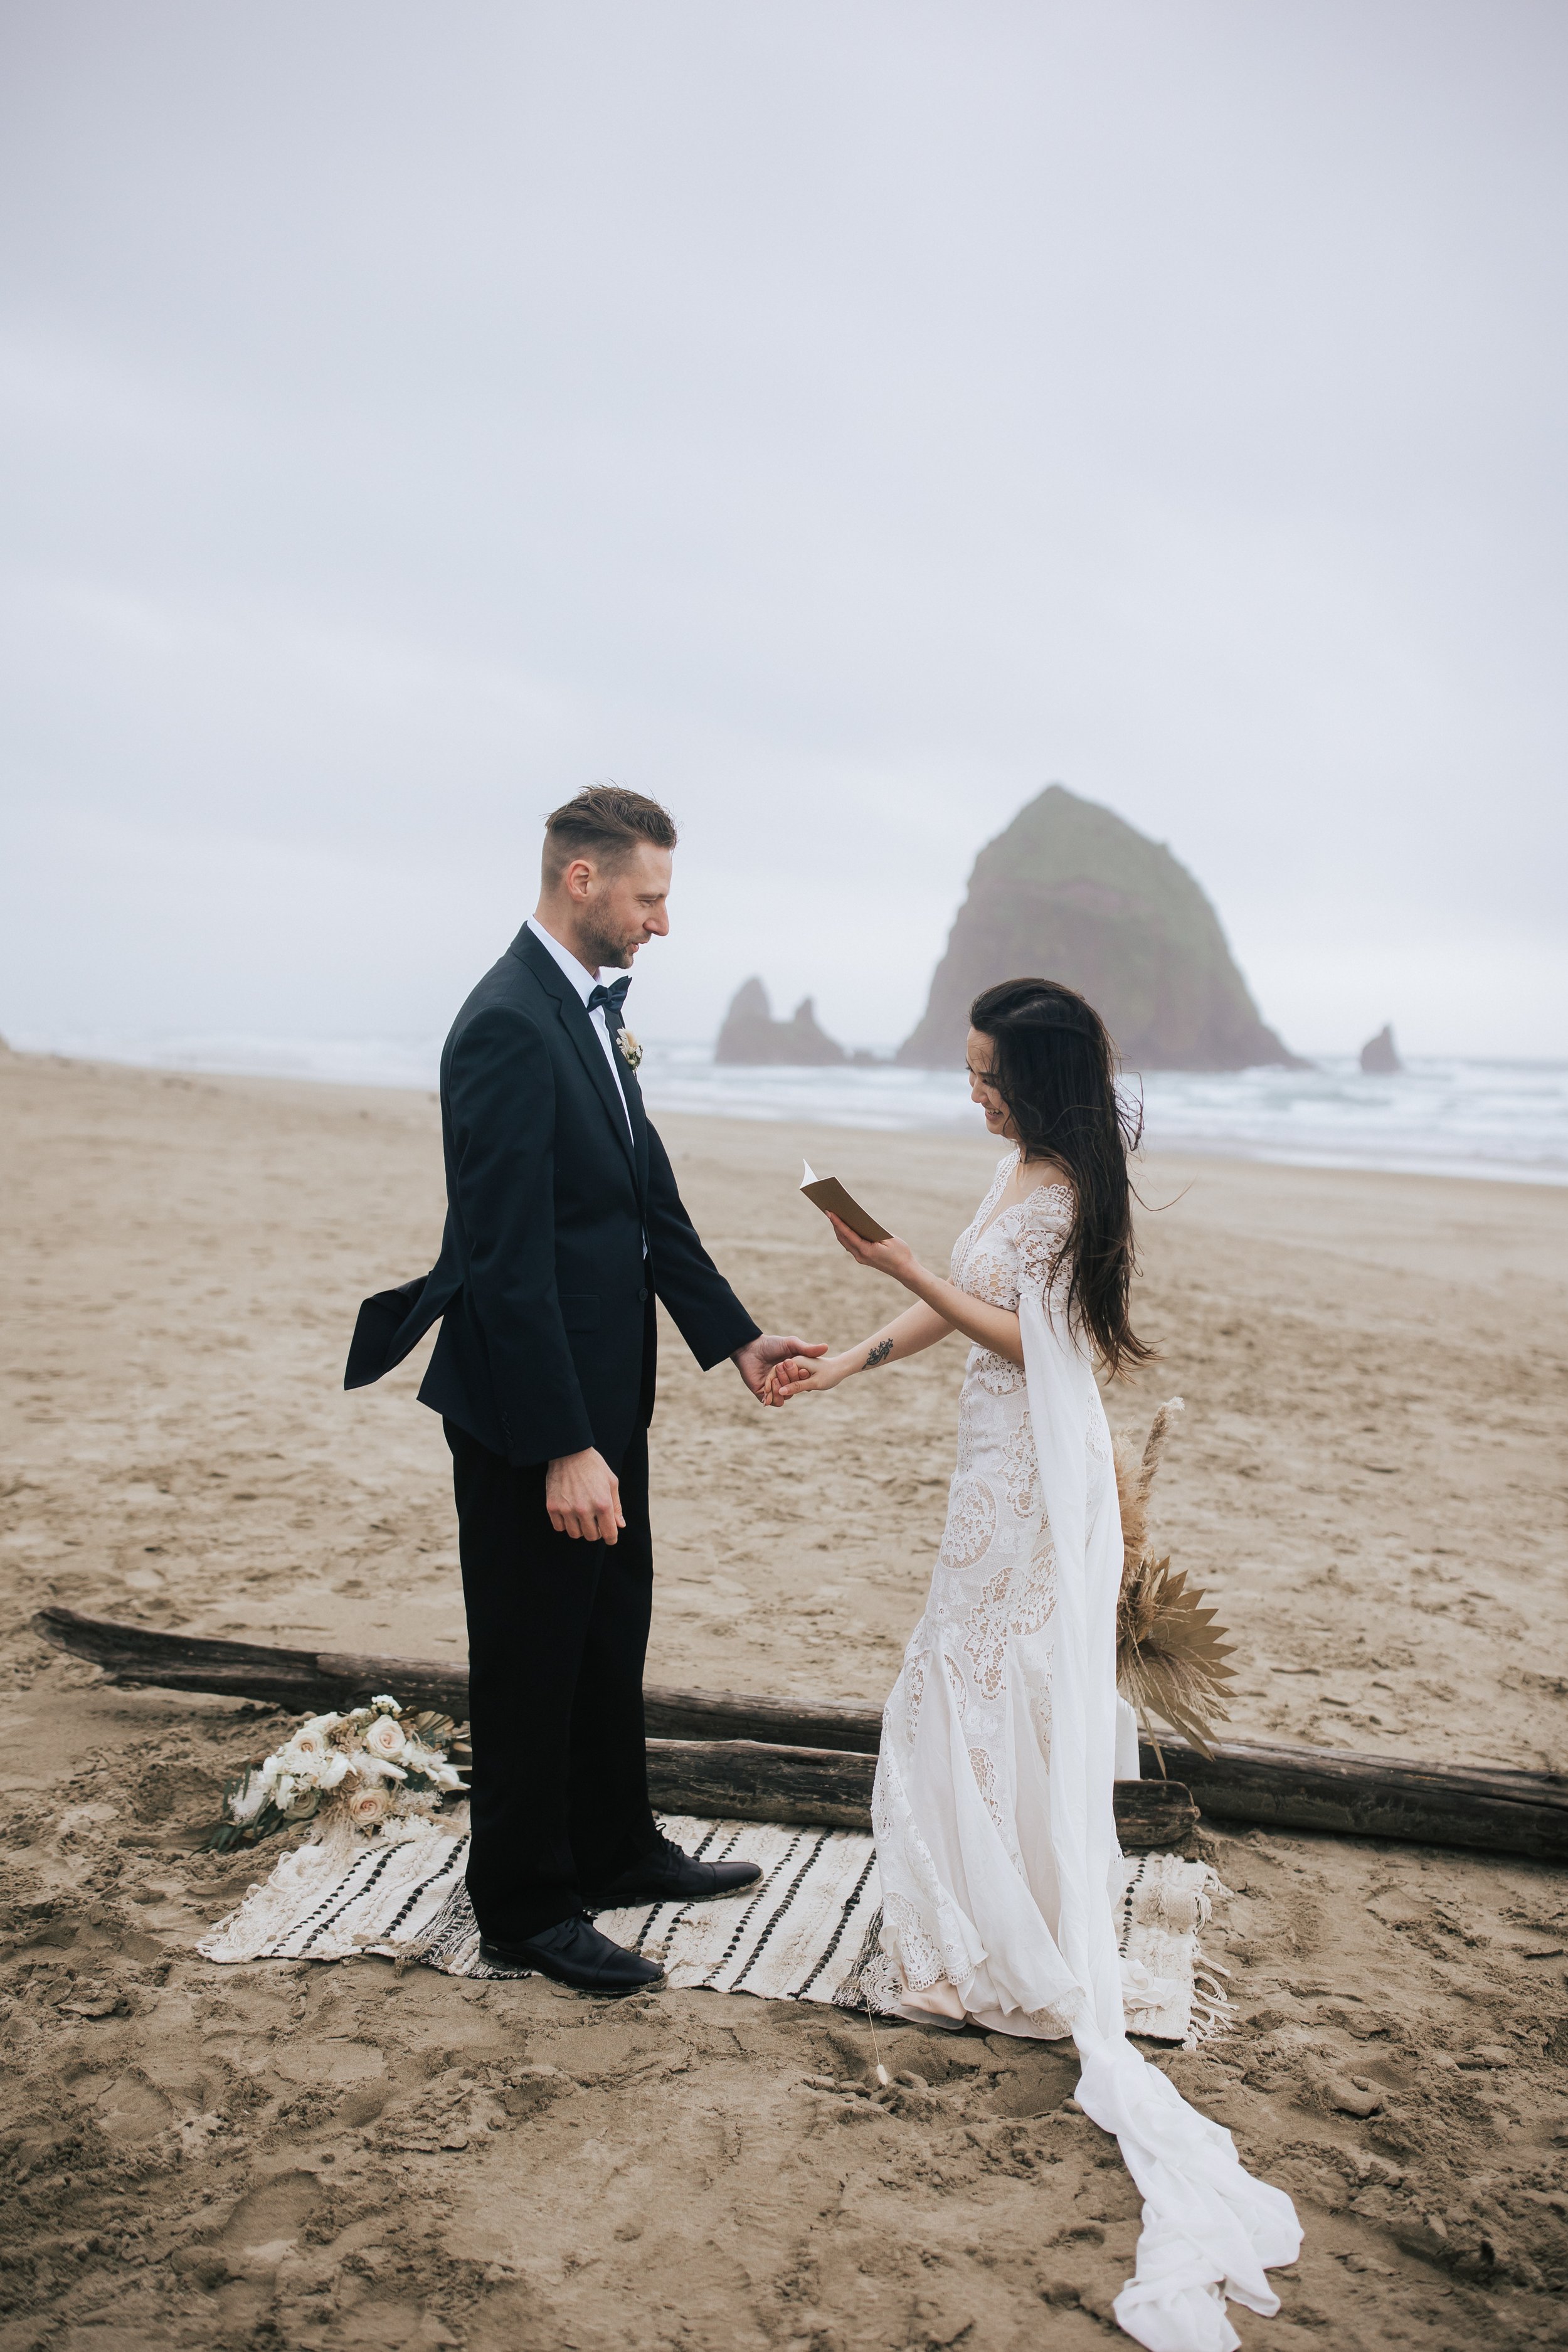  Bride reads her vows to the groom in this boho beach elopement at cannon beach in Oregon by pacific northwest elopement photographer emily jenkins photo learn how to get stunning wedding photos like this from your pnw elopement #pnw #pnwwedding #pnw